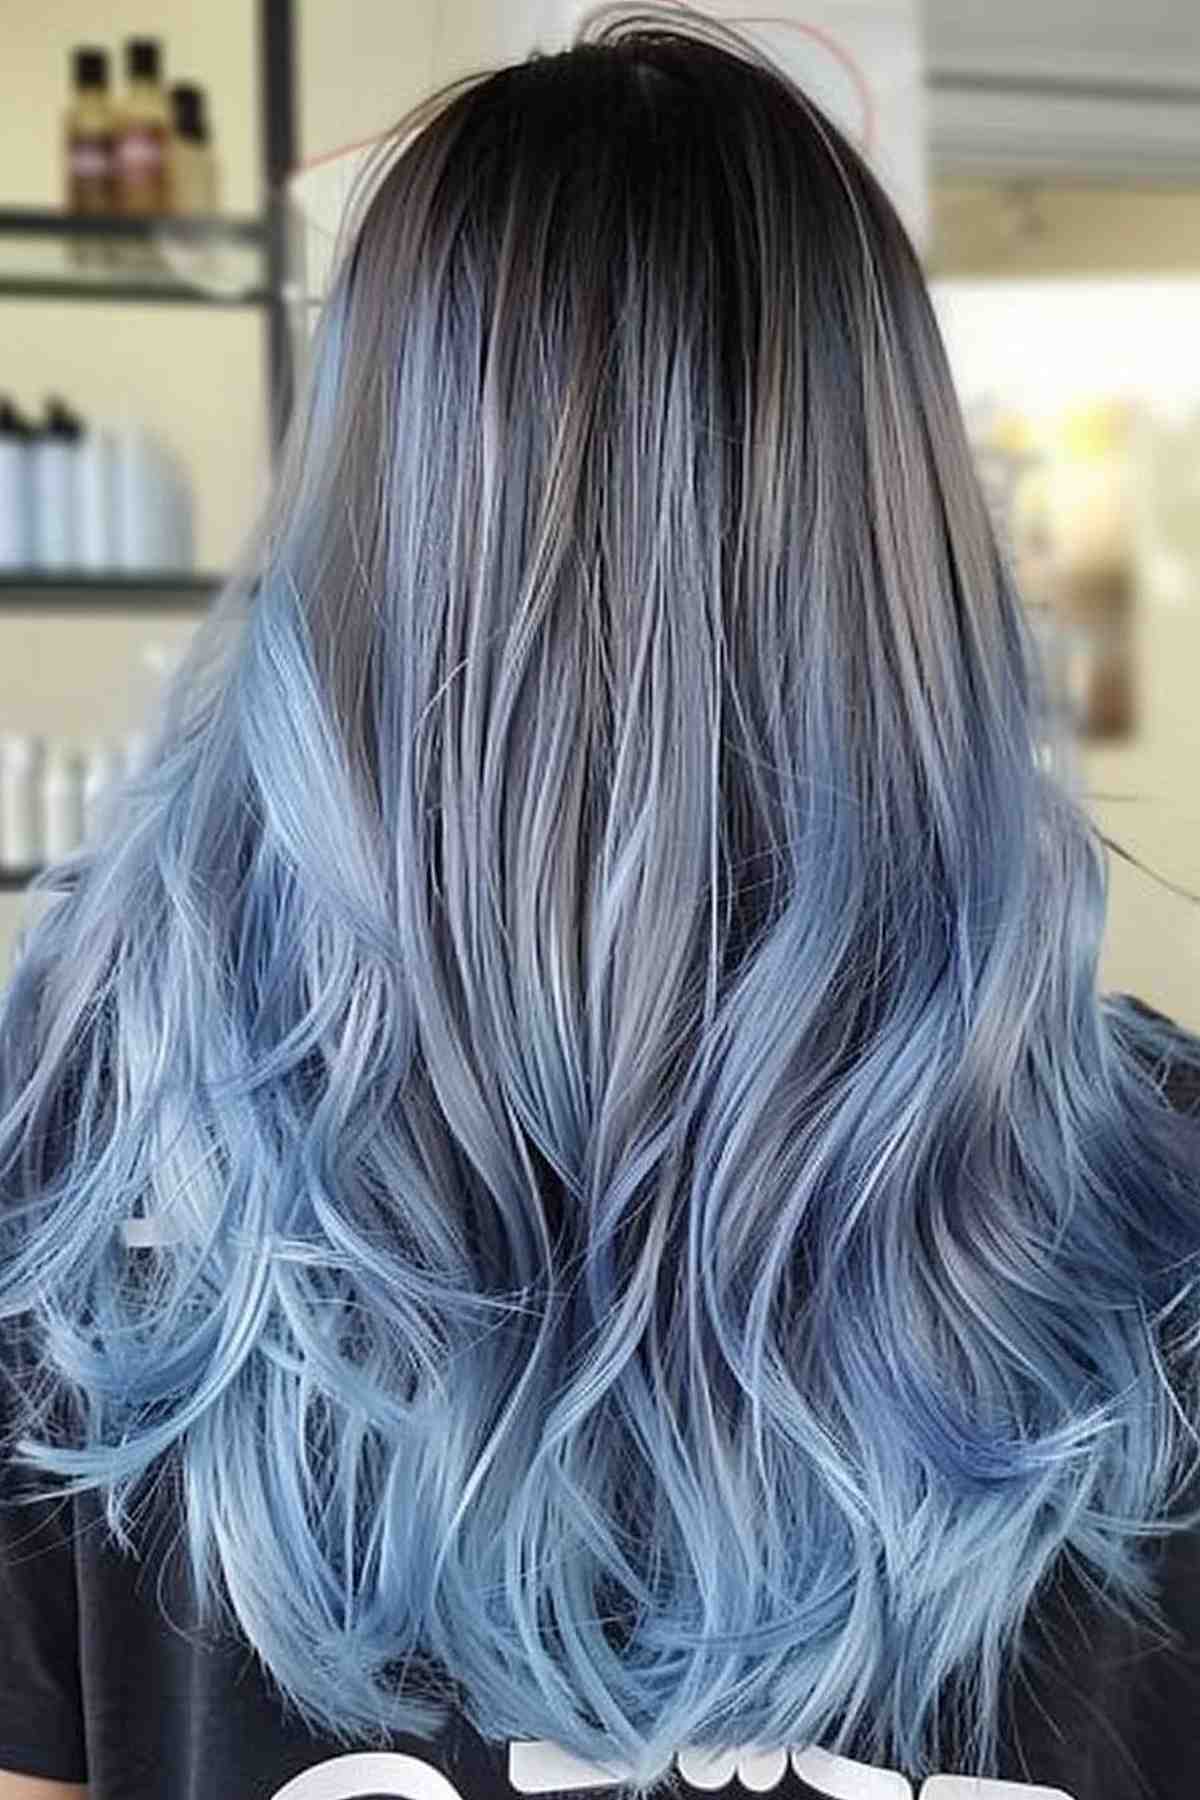 Mid-length hair transitioning from dark roots to a blue and grey ombre, capturing the essence of an oceanic palette.